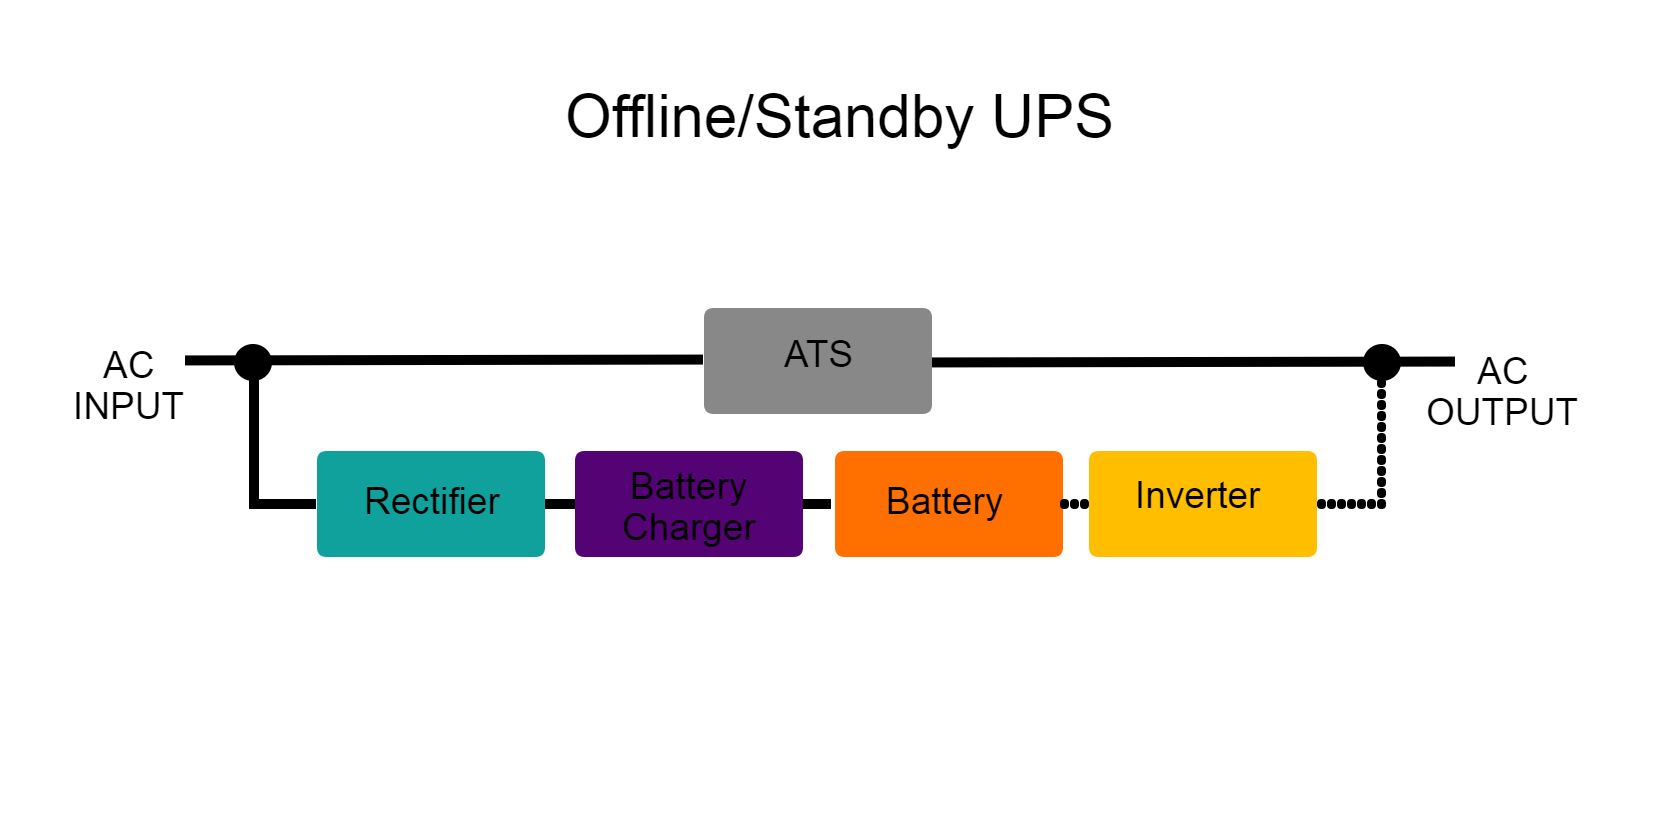 Illustration of the components of a standby UPS